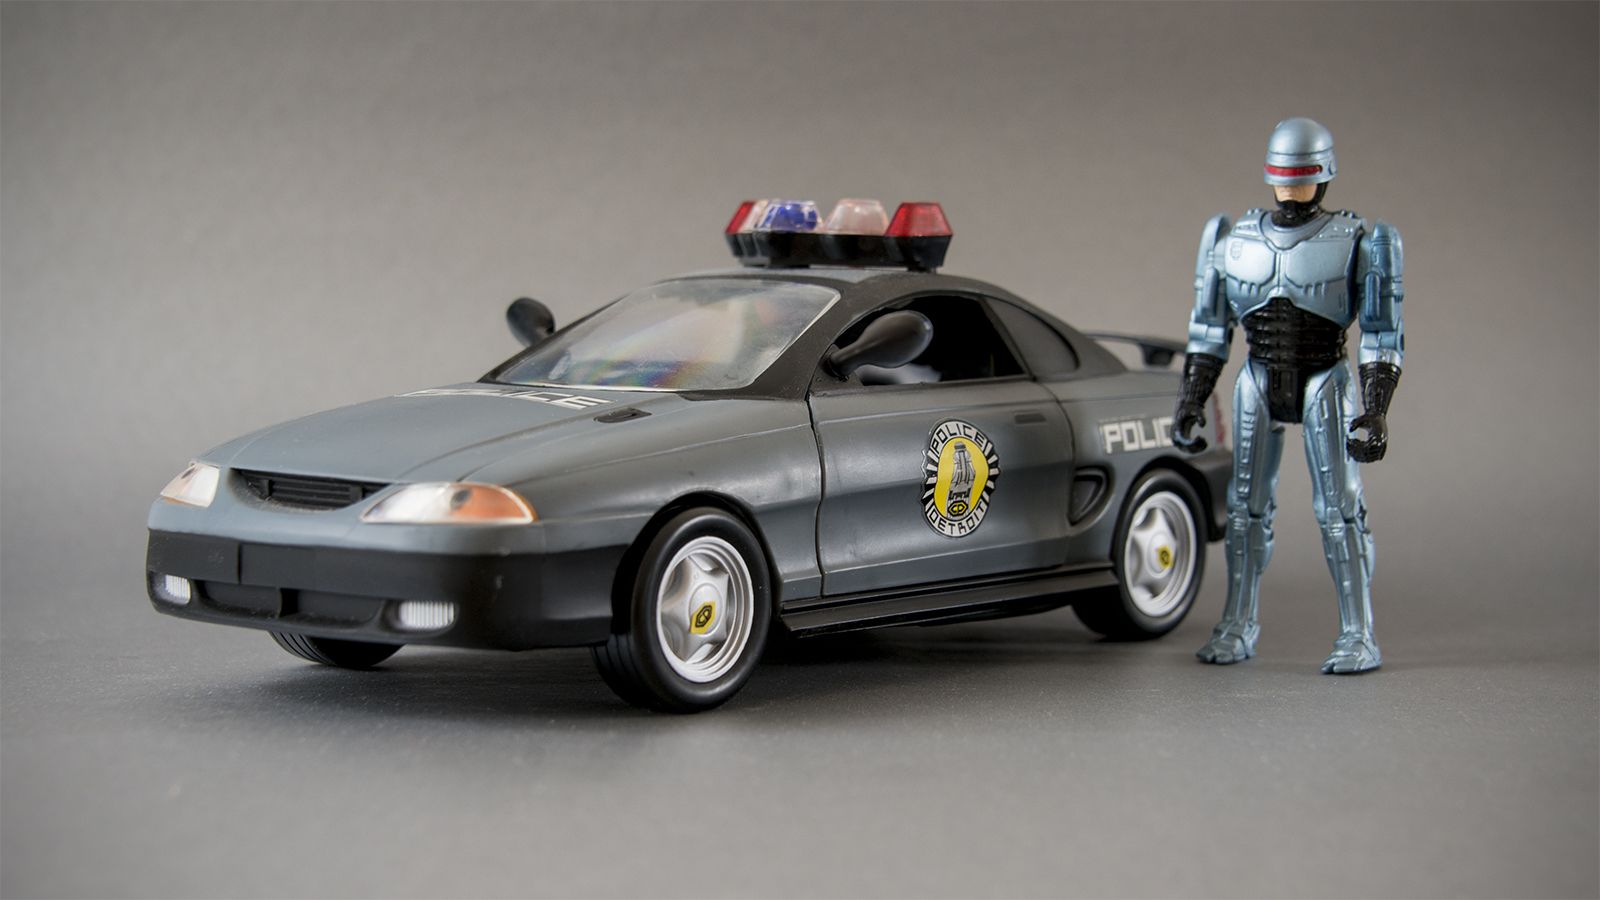 In 1994 Robocop Traded His Taurus For A Ford Mustang Spawning These Toy Island Collectibles